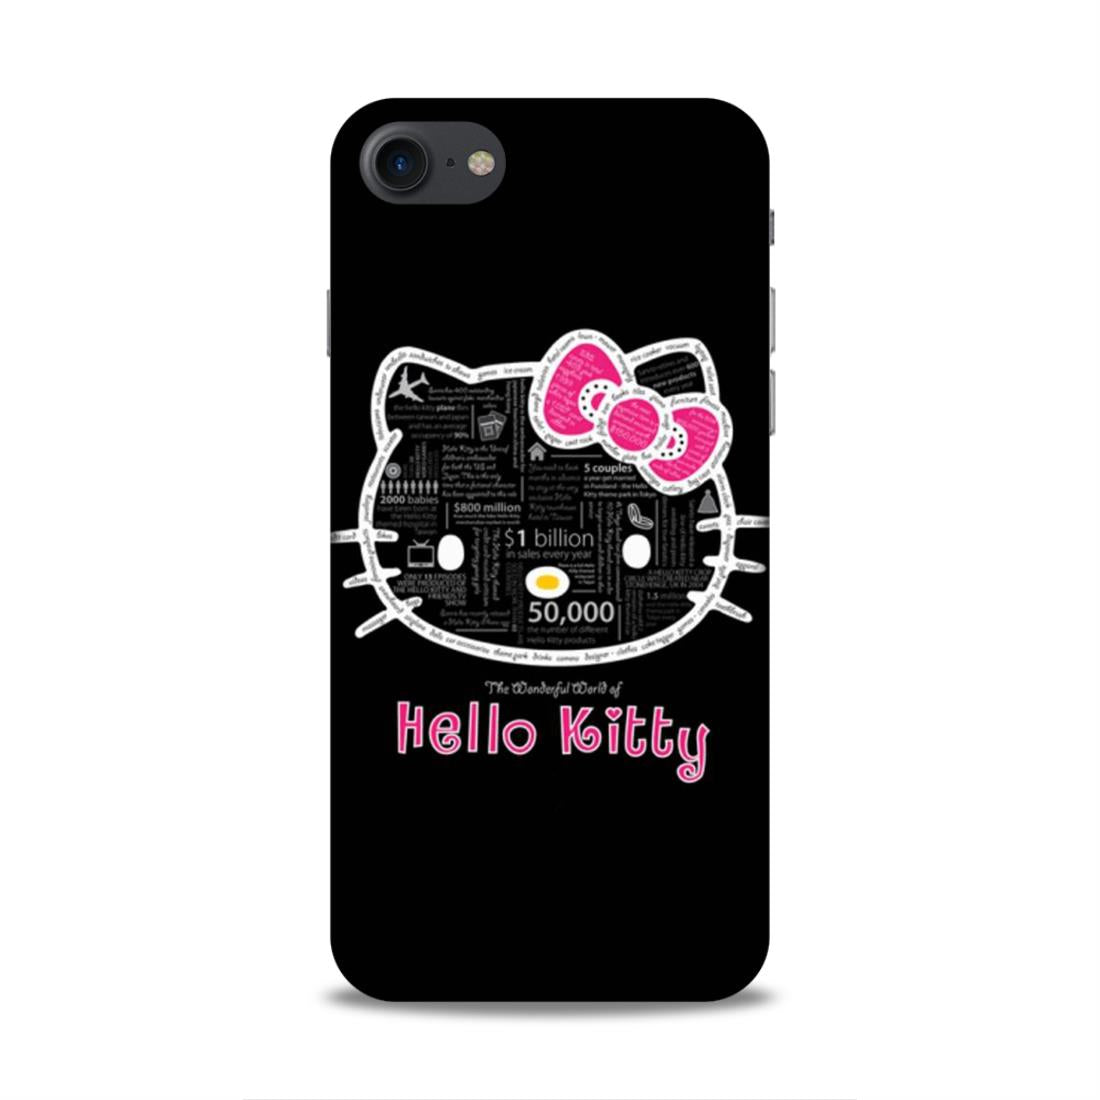 Hello Kitty Hard Back Case For Apple iPhone 7 / 8 / SE 2020